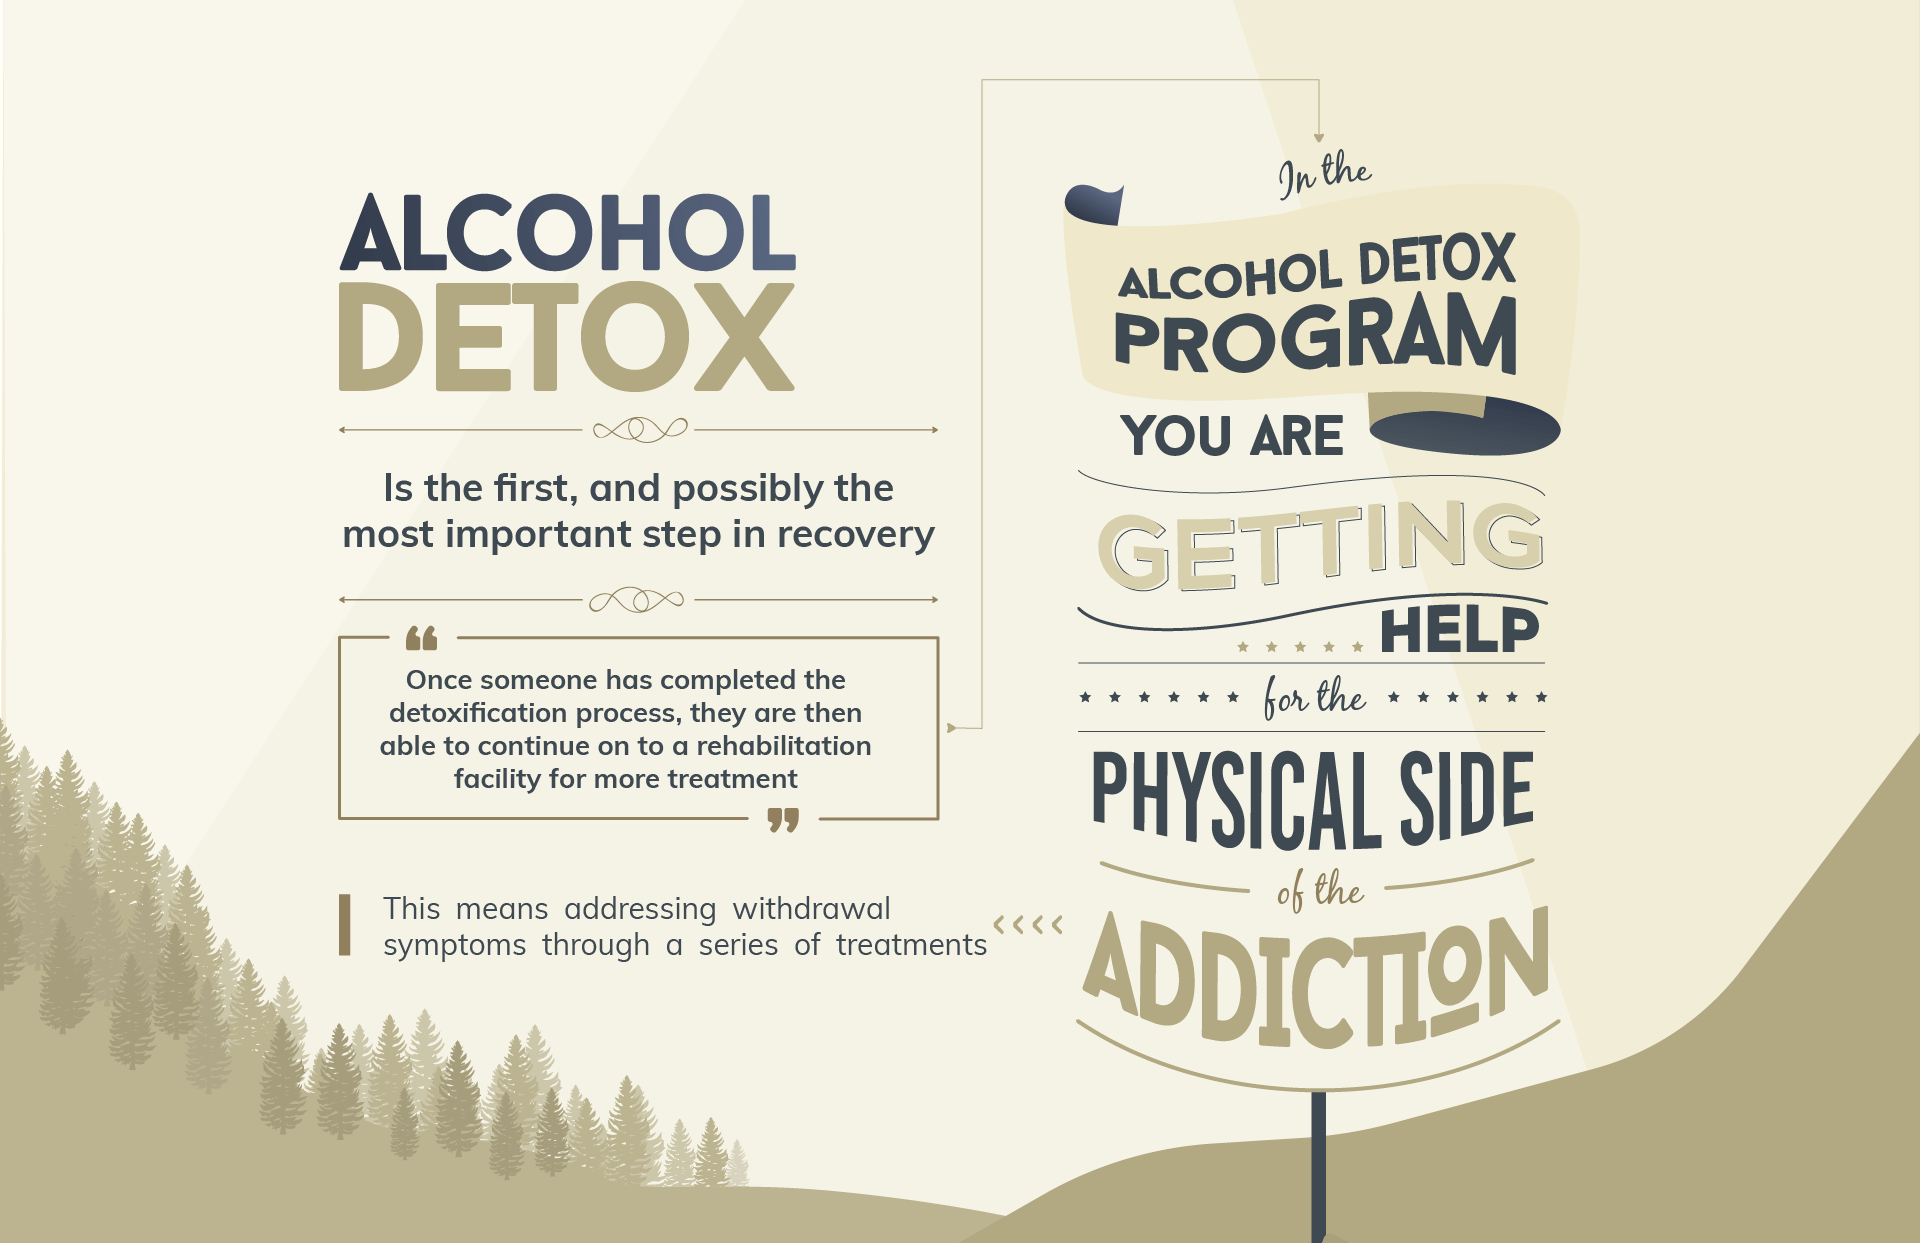 In the alcohol detox program you are getting help for the physical side of the addiction. This means addressing withdrawal symptoms through a series of treatments. Alcohol detox is the first, and possibly the most important step in recovery, once someone has completed the detoxification process, they are then able to continue on to a rehabilitation facility for more treatment